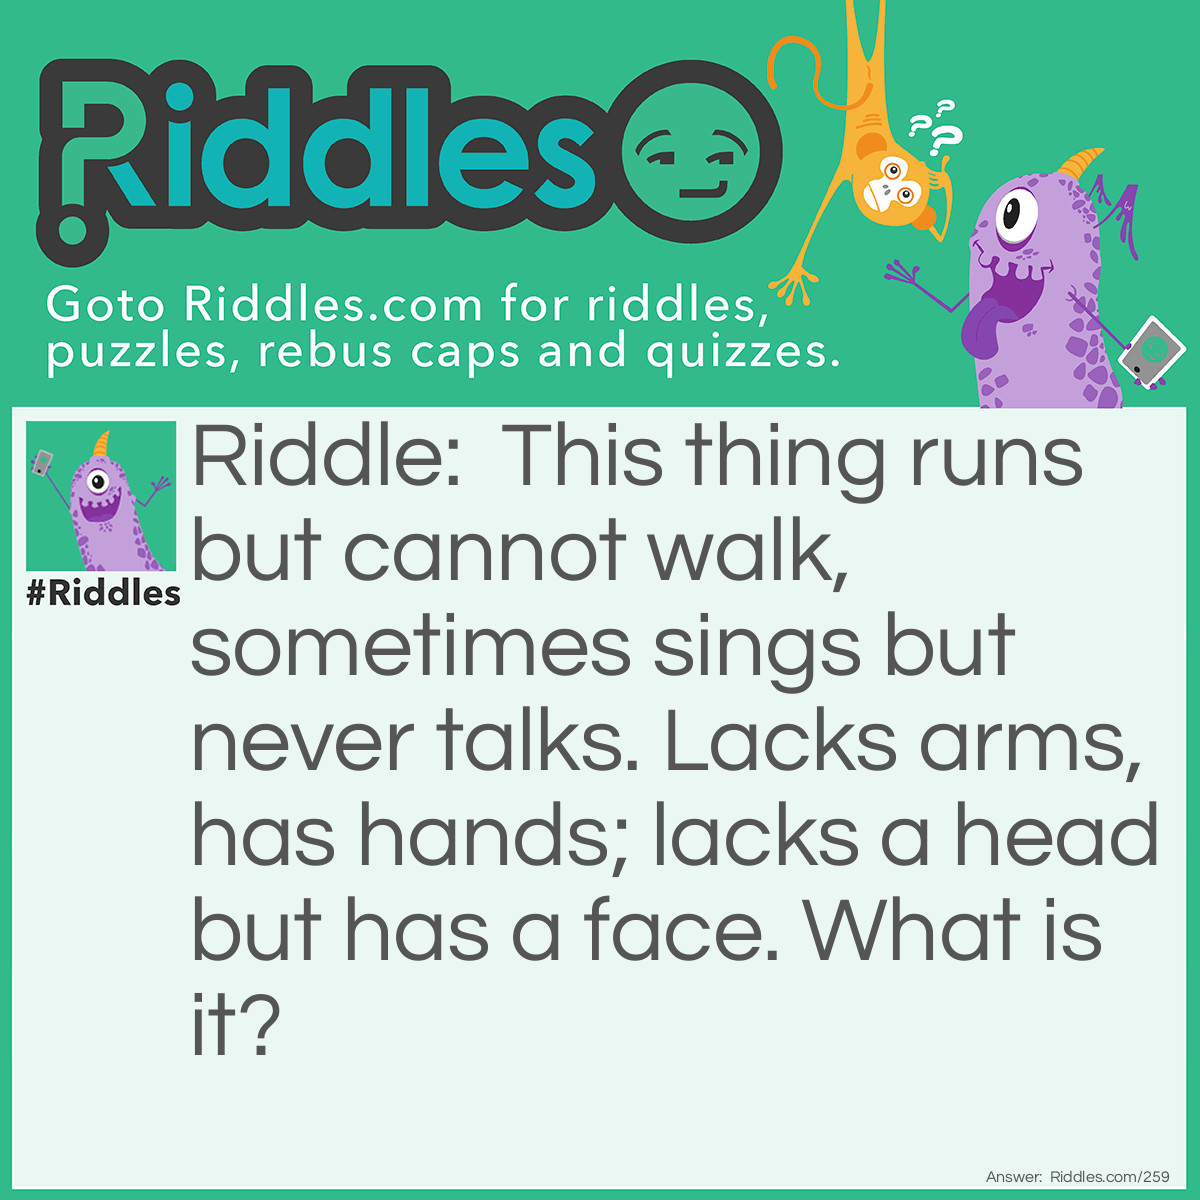 Riddle: This thing runs but cannot walk, sometimes sings but never talks. Lacks arms, has hands; lacks a head but has a face. What is it? Answer: A Clock.